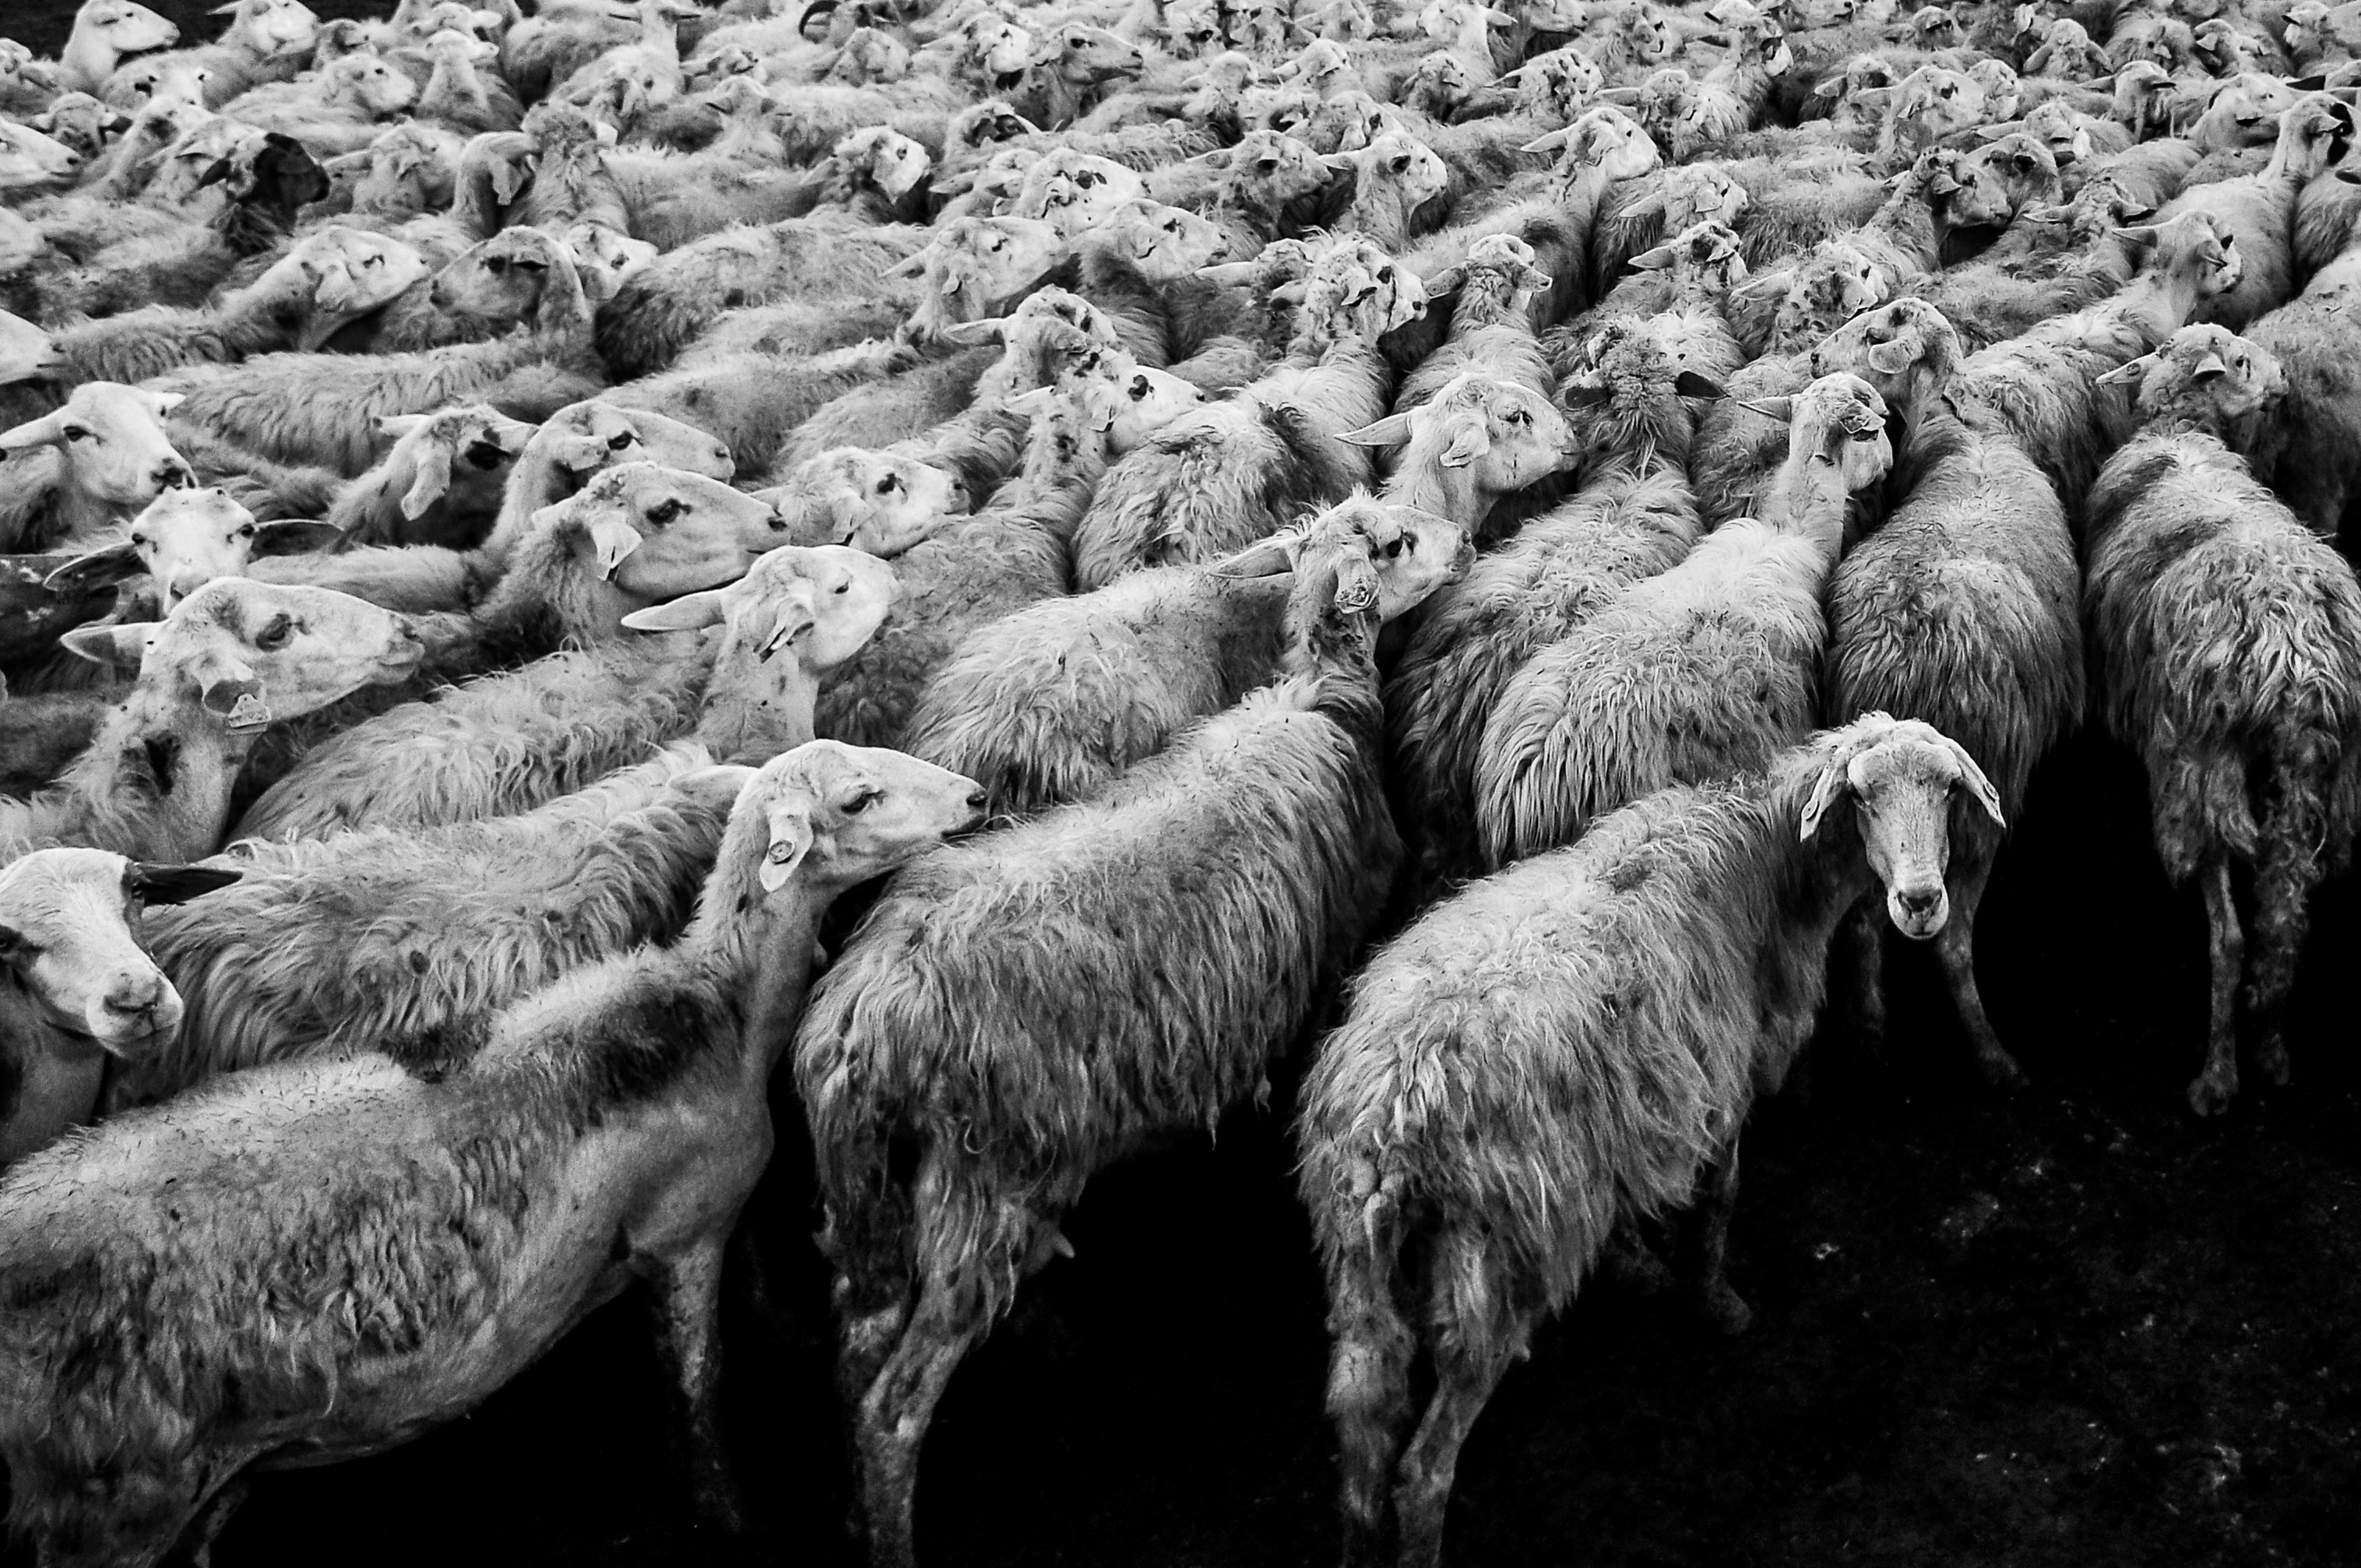 A black and white image of a herd of sheep with one sheep looking back at the camera